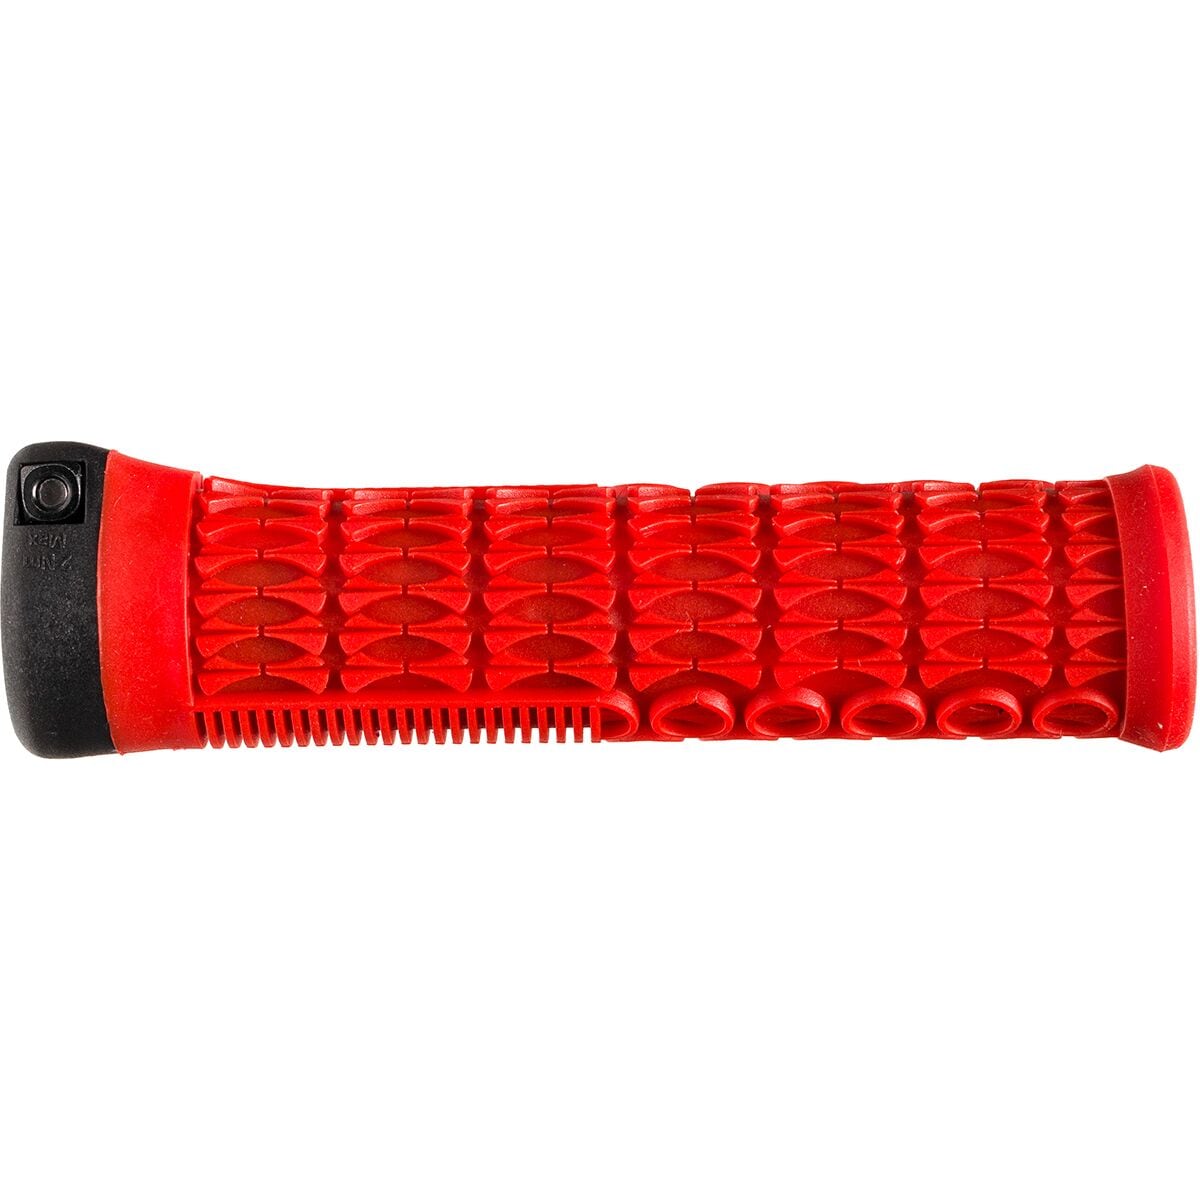 SDG Components Thrice Lock-On Grips Red, 31mm